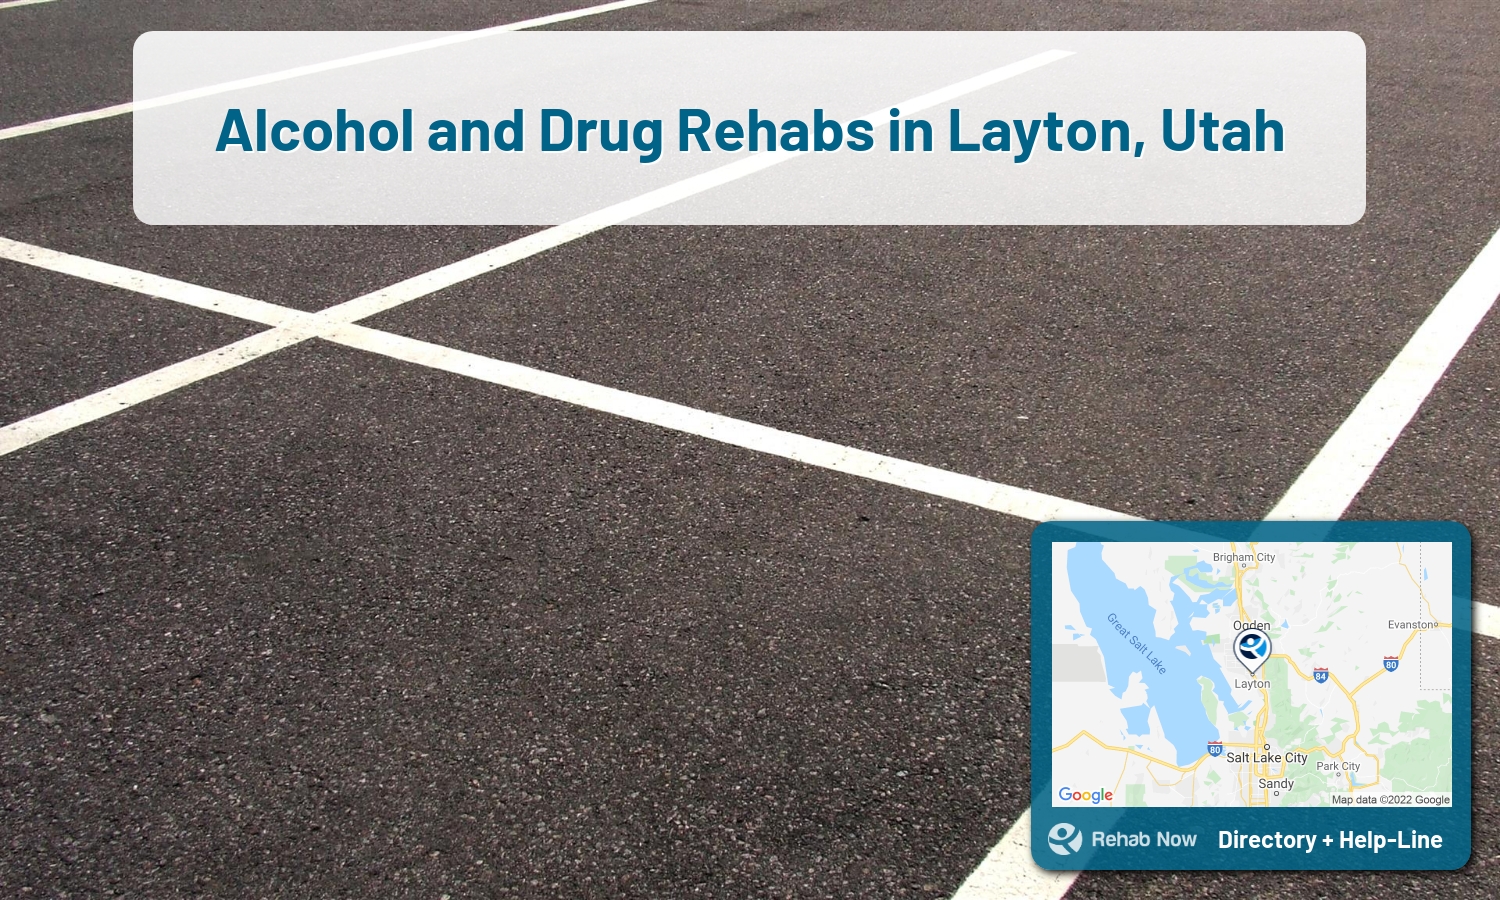 Easily find the top Rehab Centers in Layton, UT. We researched hard to pick the best alcohol and drug rehab centers in Utah.